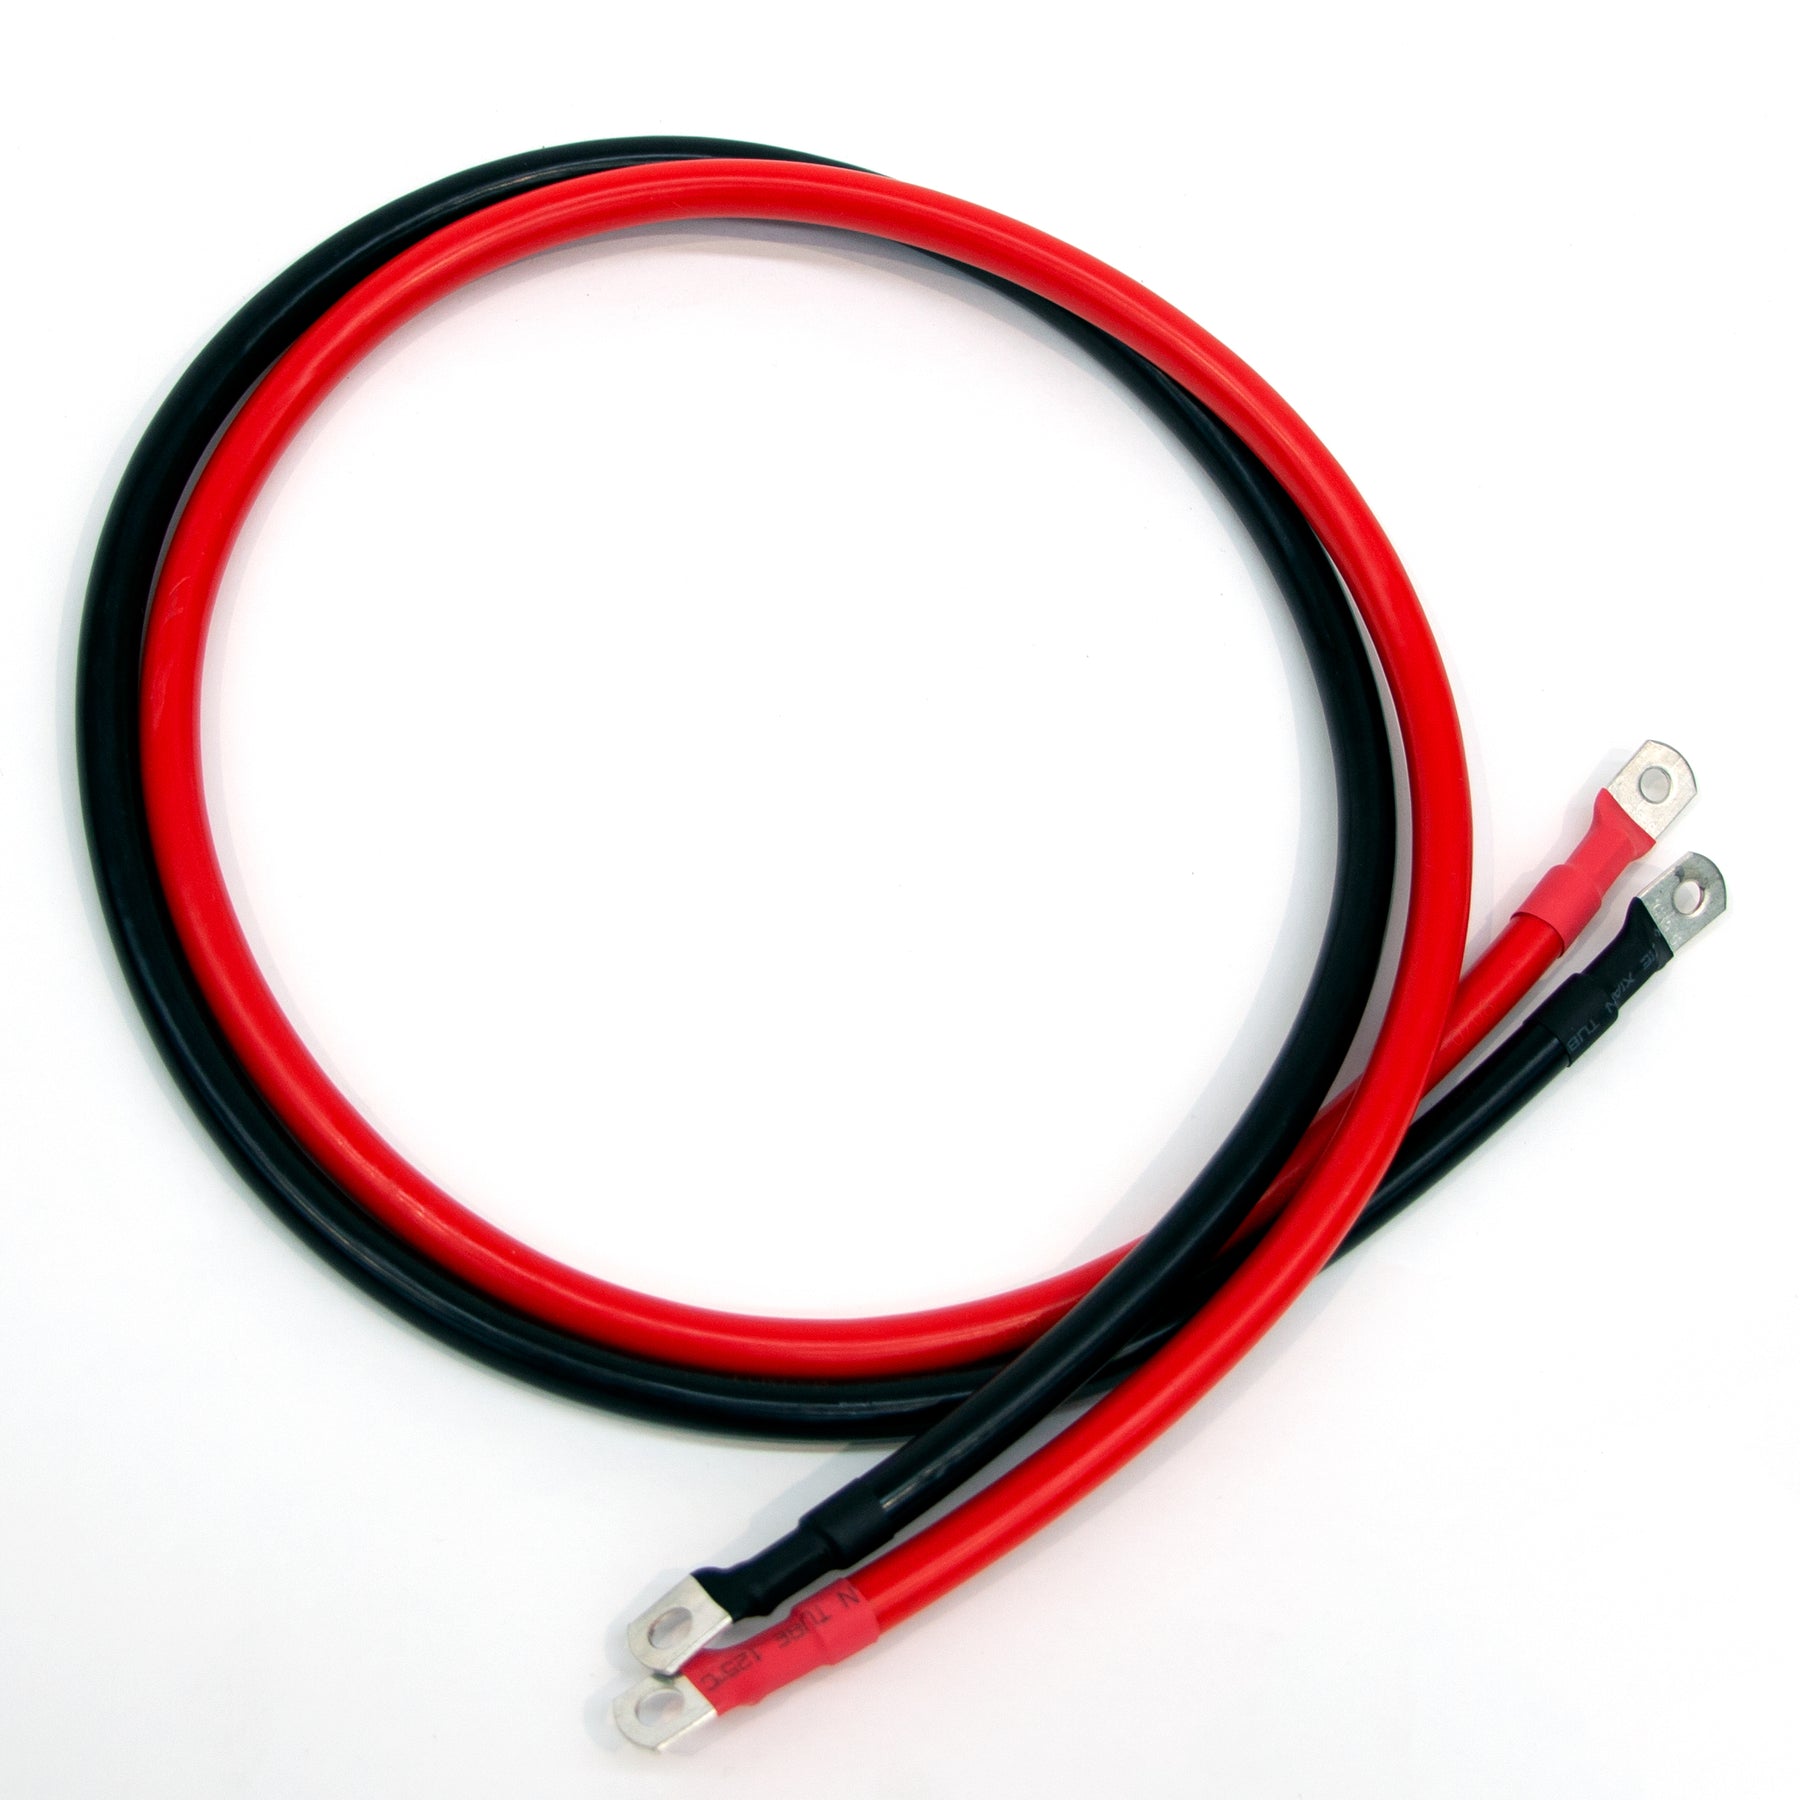 35mm² Pre-Crimped Cable Red&Black 1 meter - M8 + M6